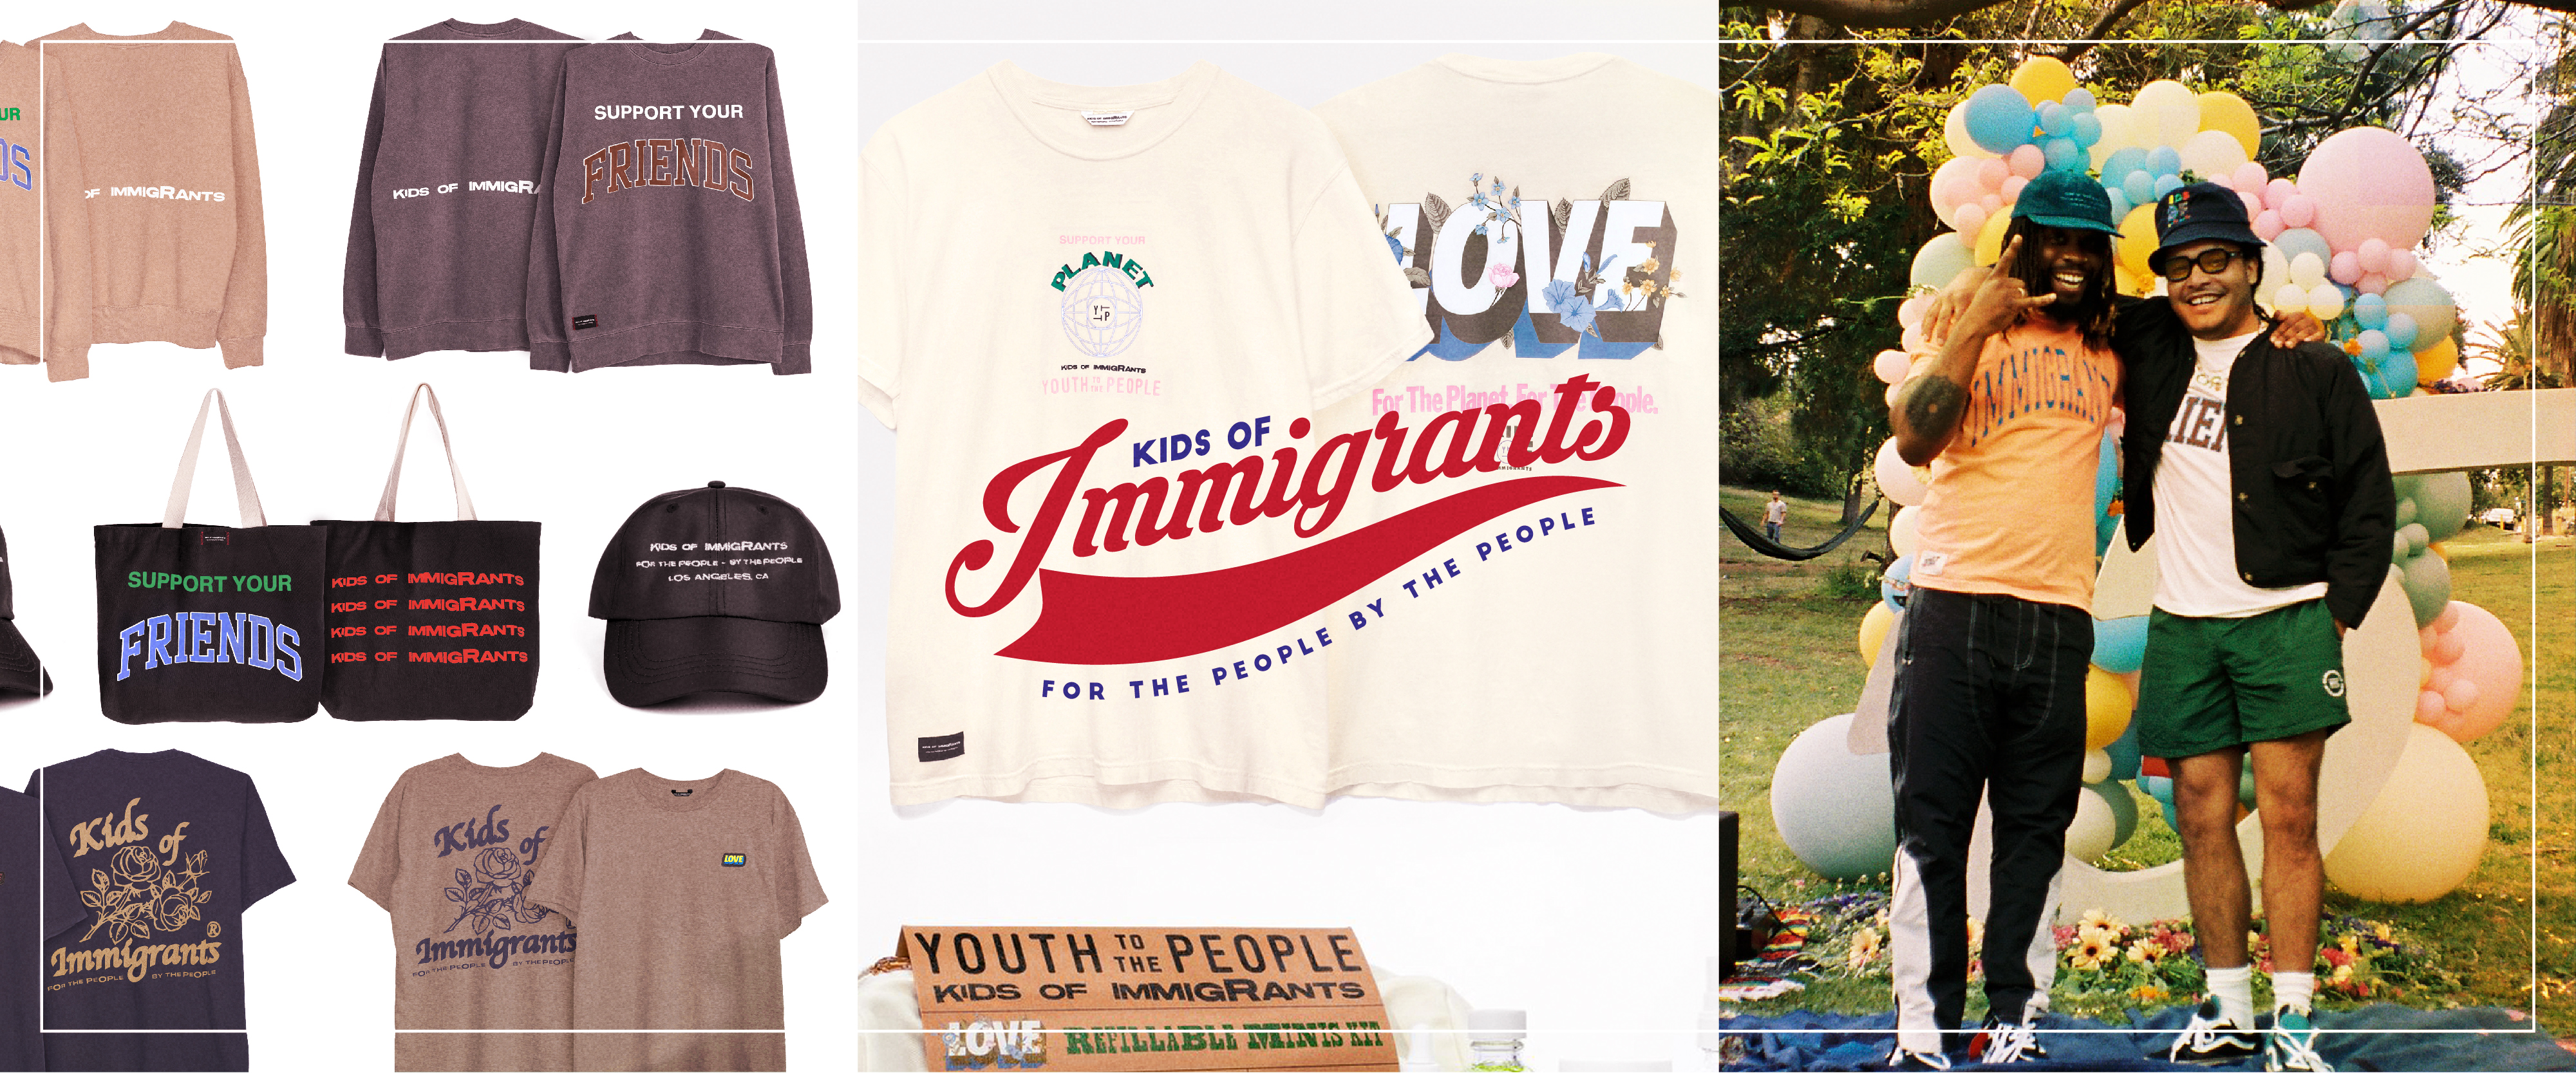 99designs by Vistaprint Kids of Immigrants